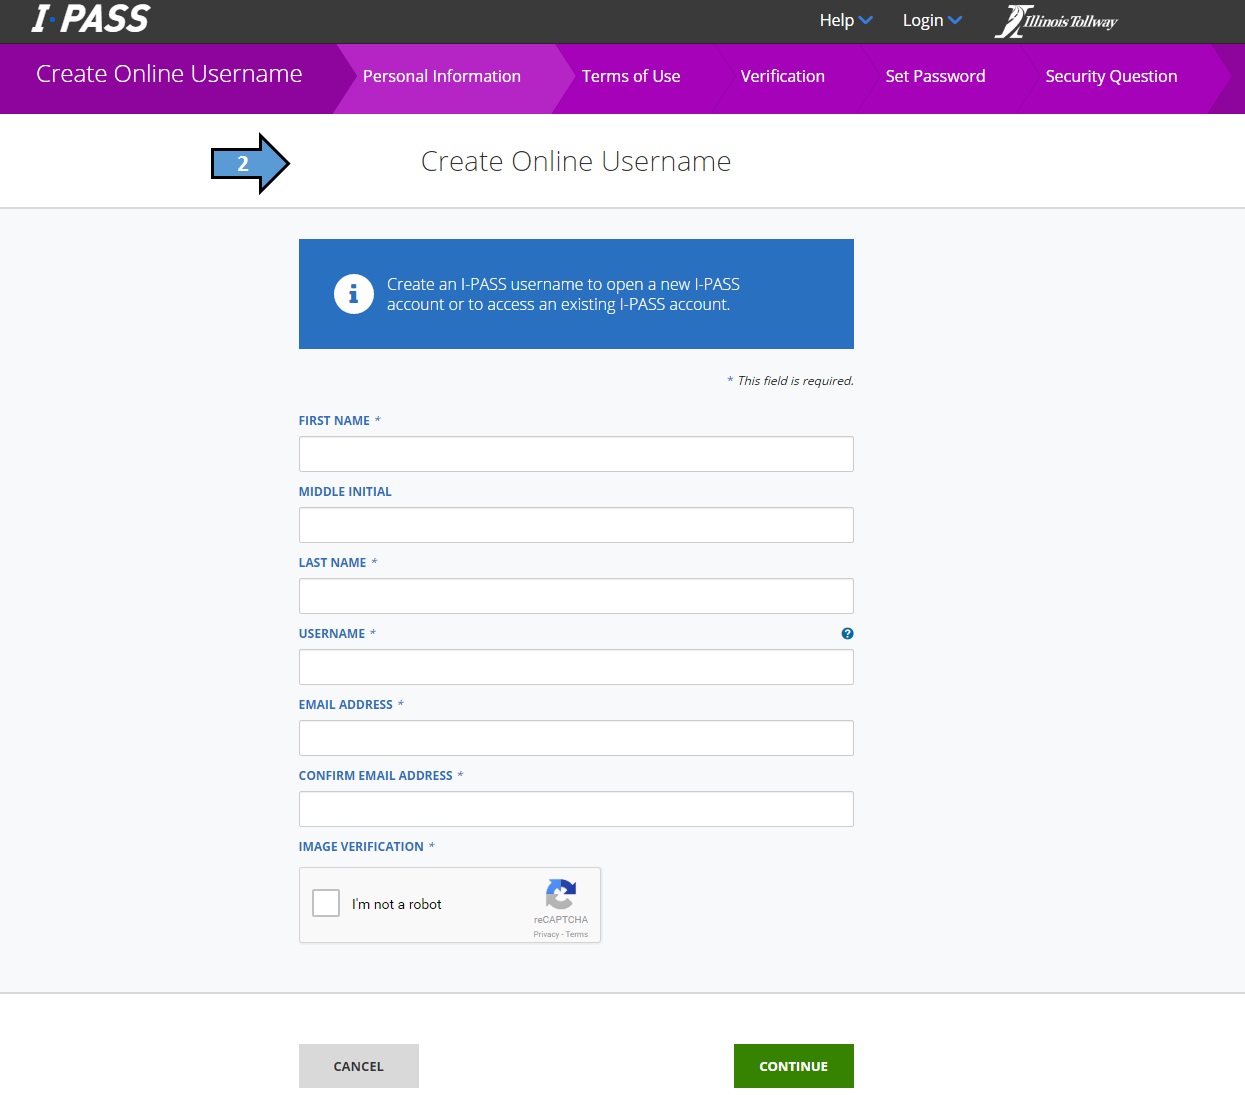 Adding an Authorized User to your I-PASS Account